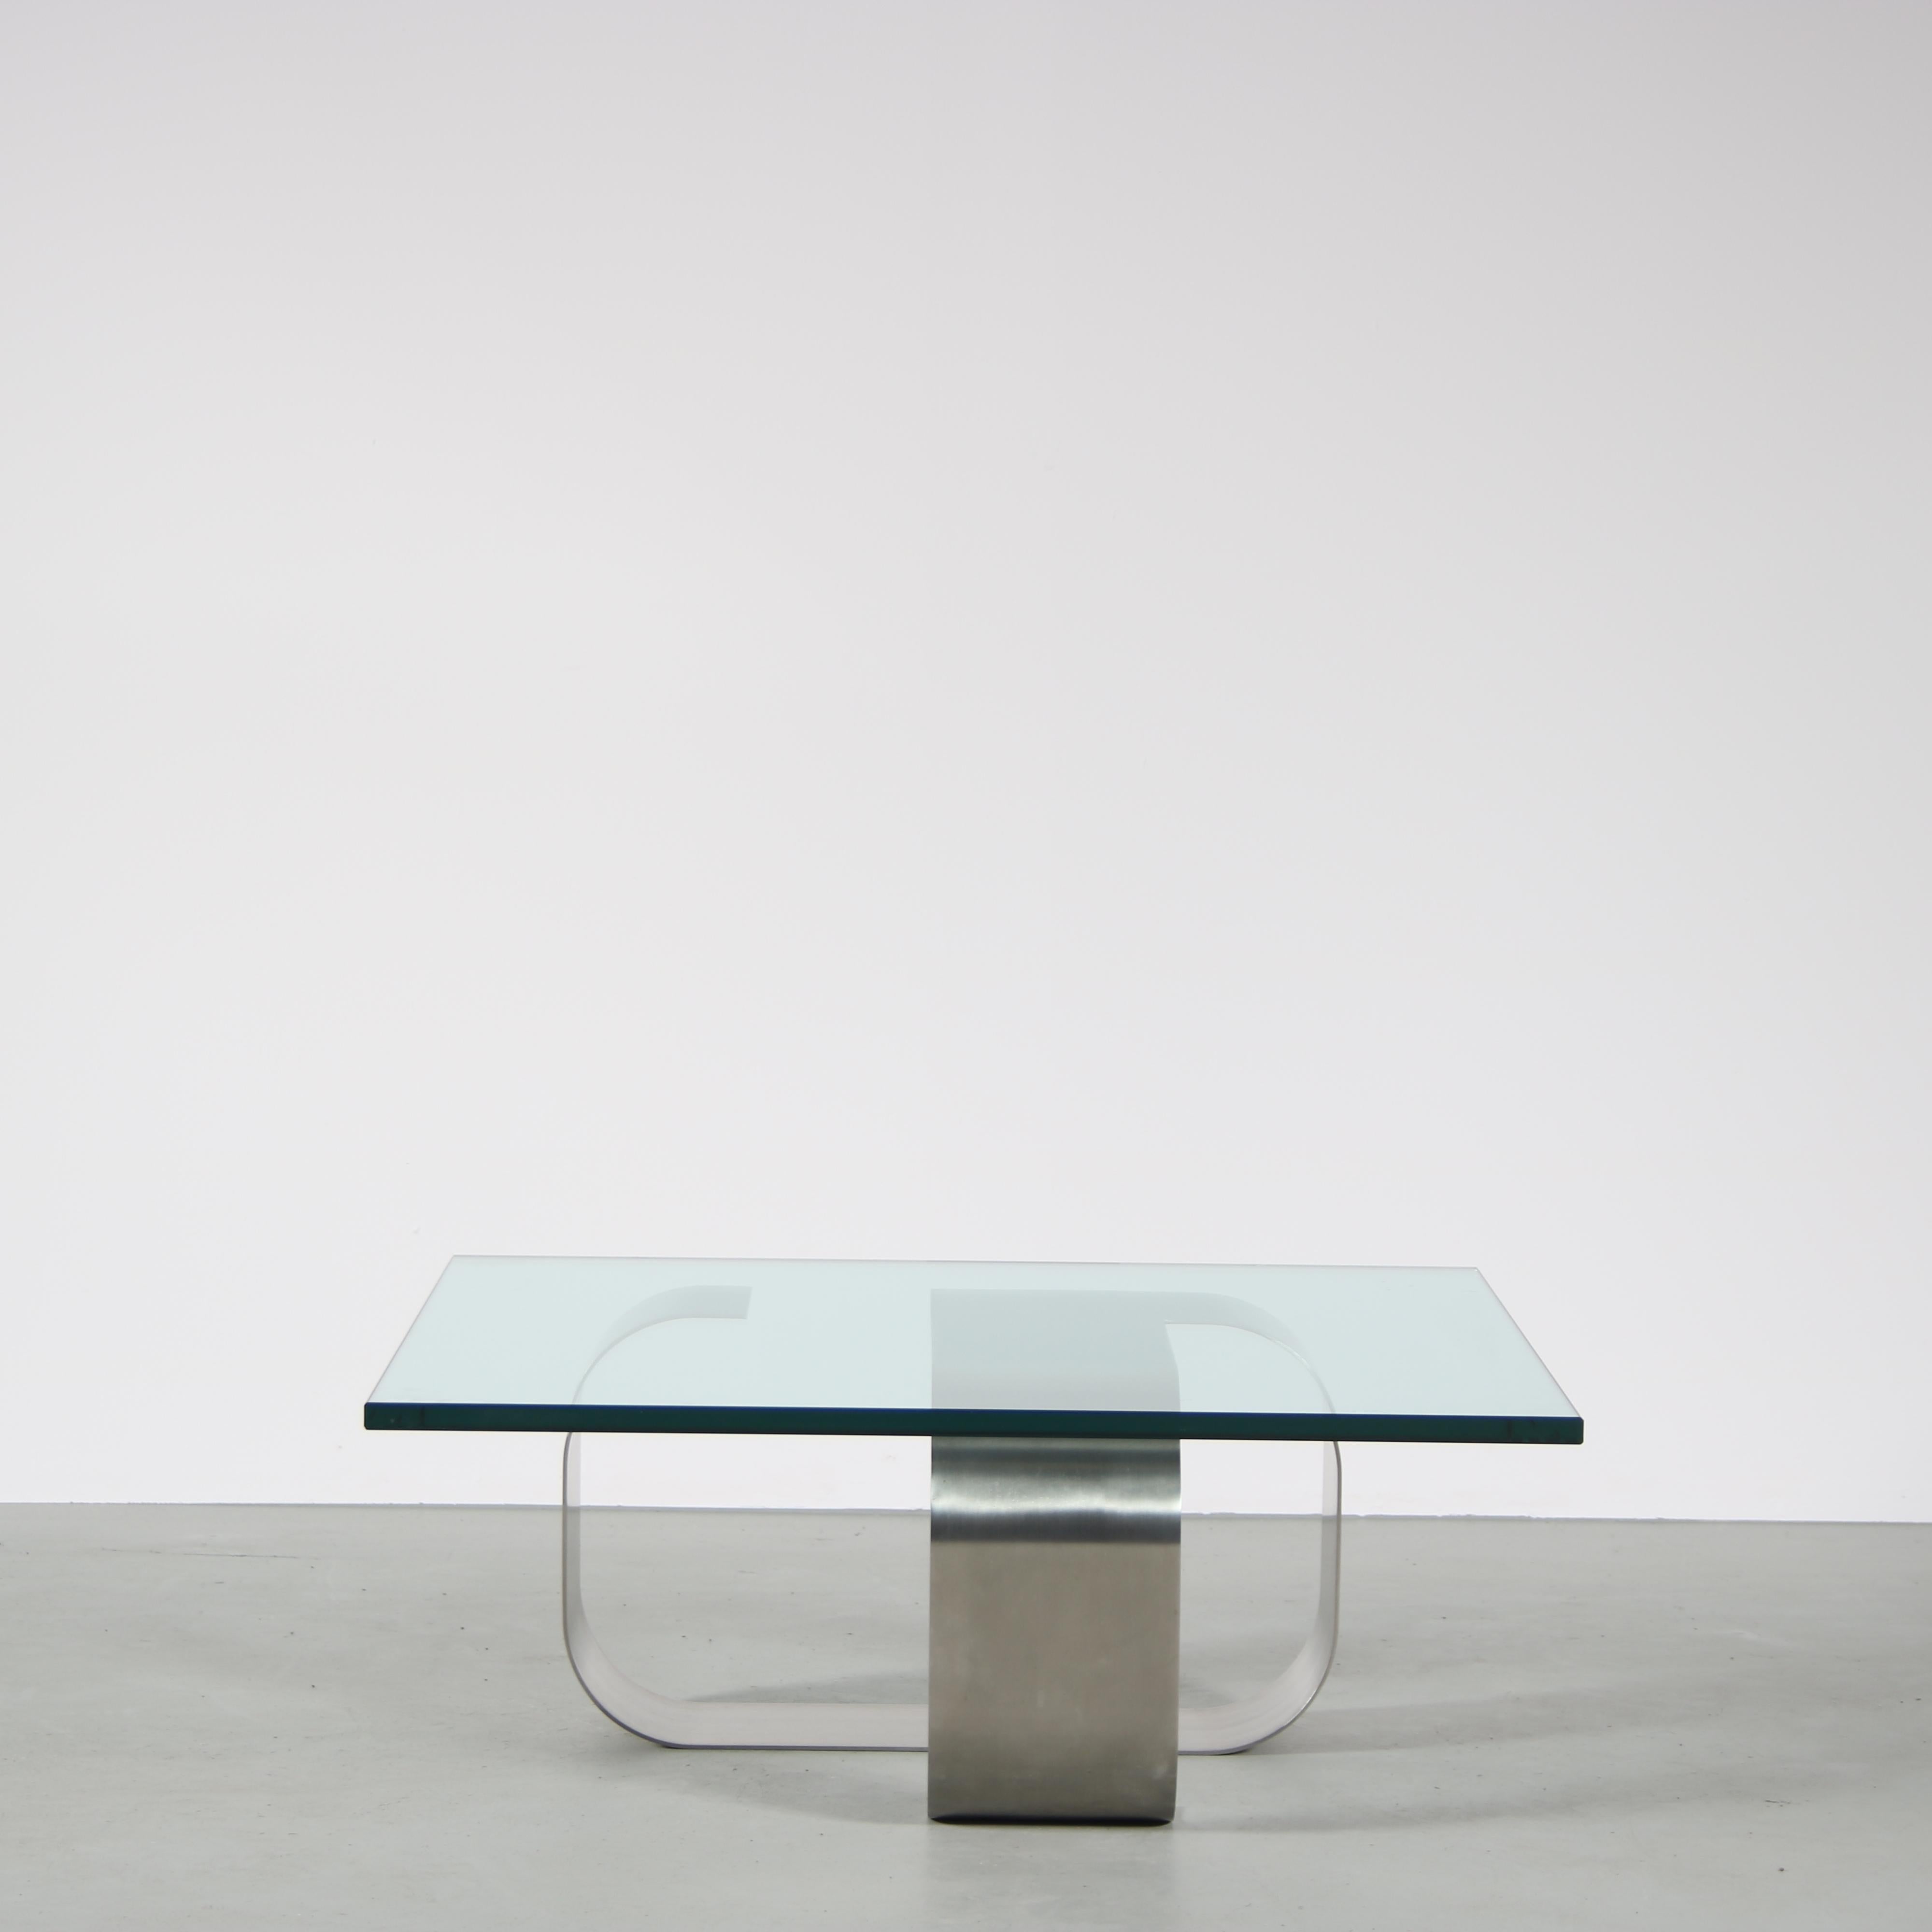 An eye-catching coffee table designed by Francois Monnet, manufactured by Kappa in France around 1970.

The piece has an elegantly curved, stainless steel base. The flat structure of the base combines this sense of elegance with a nice modern